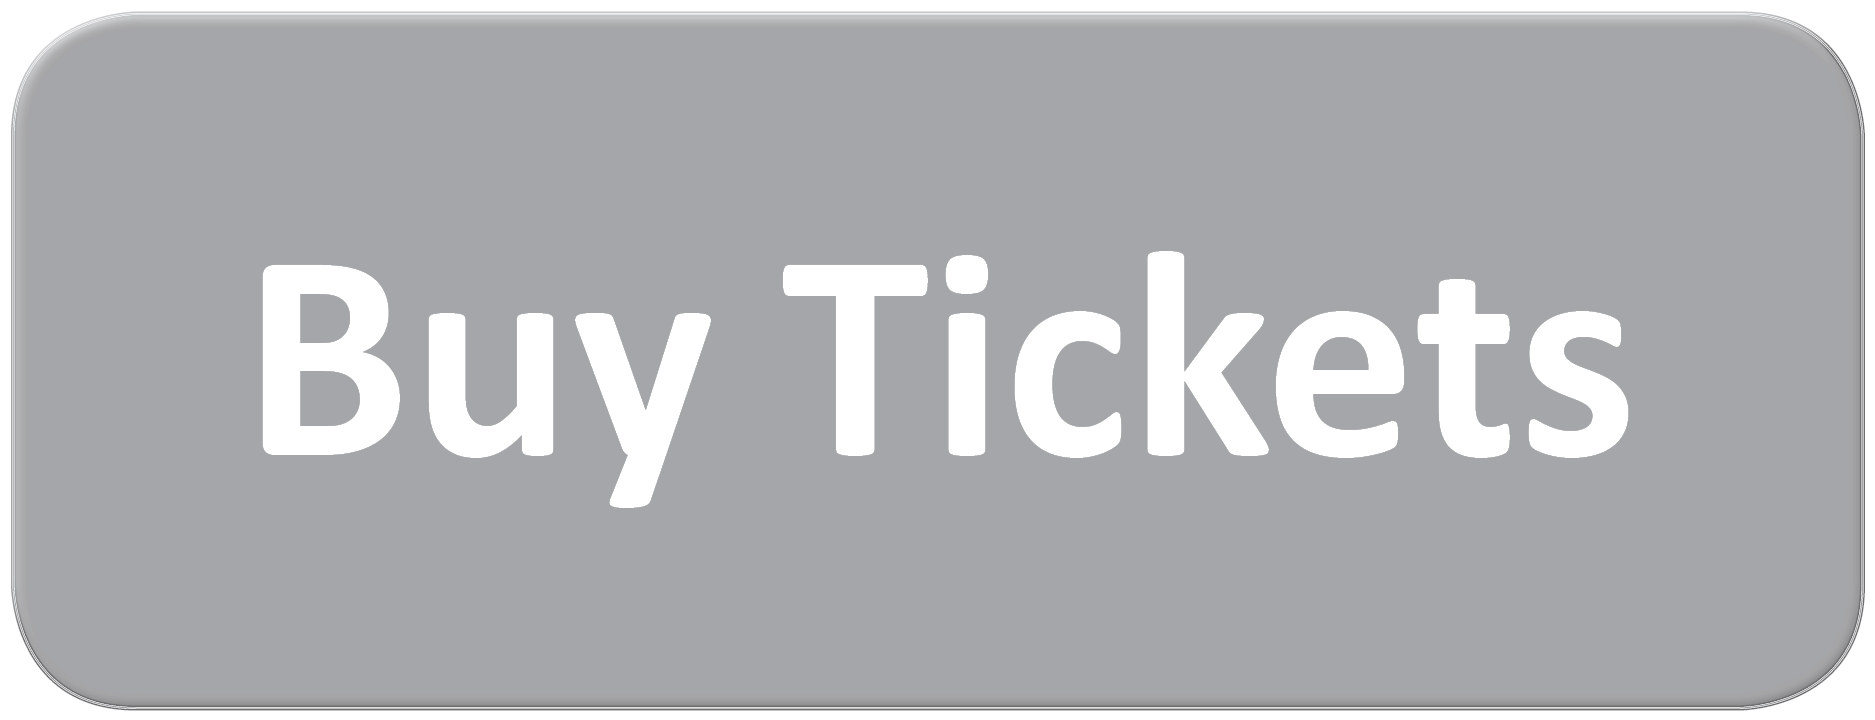 Buy Tickets Button Gray Background PNG